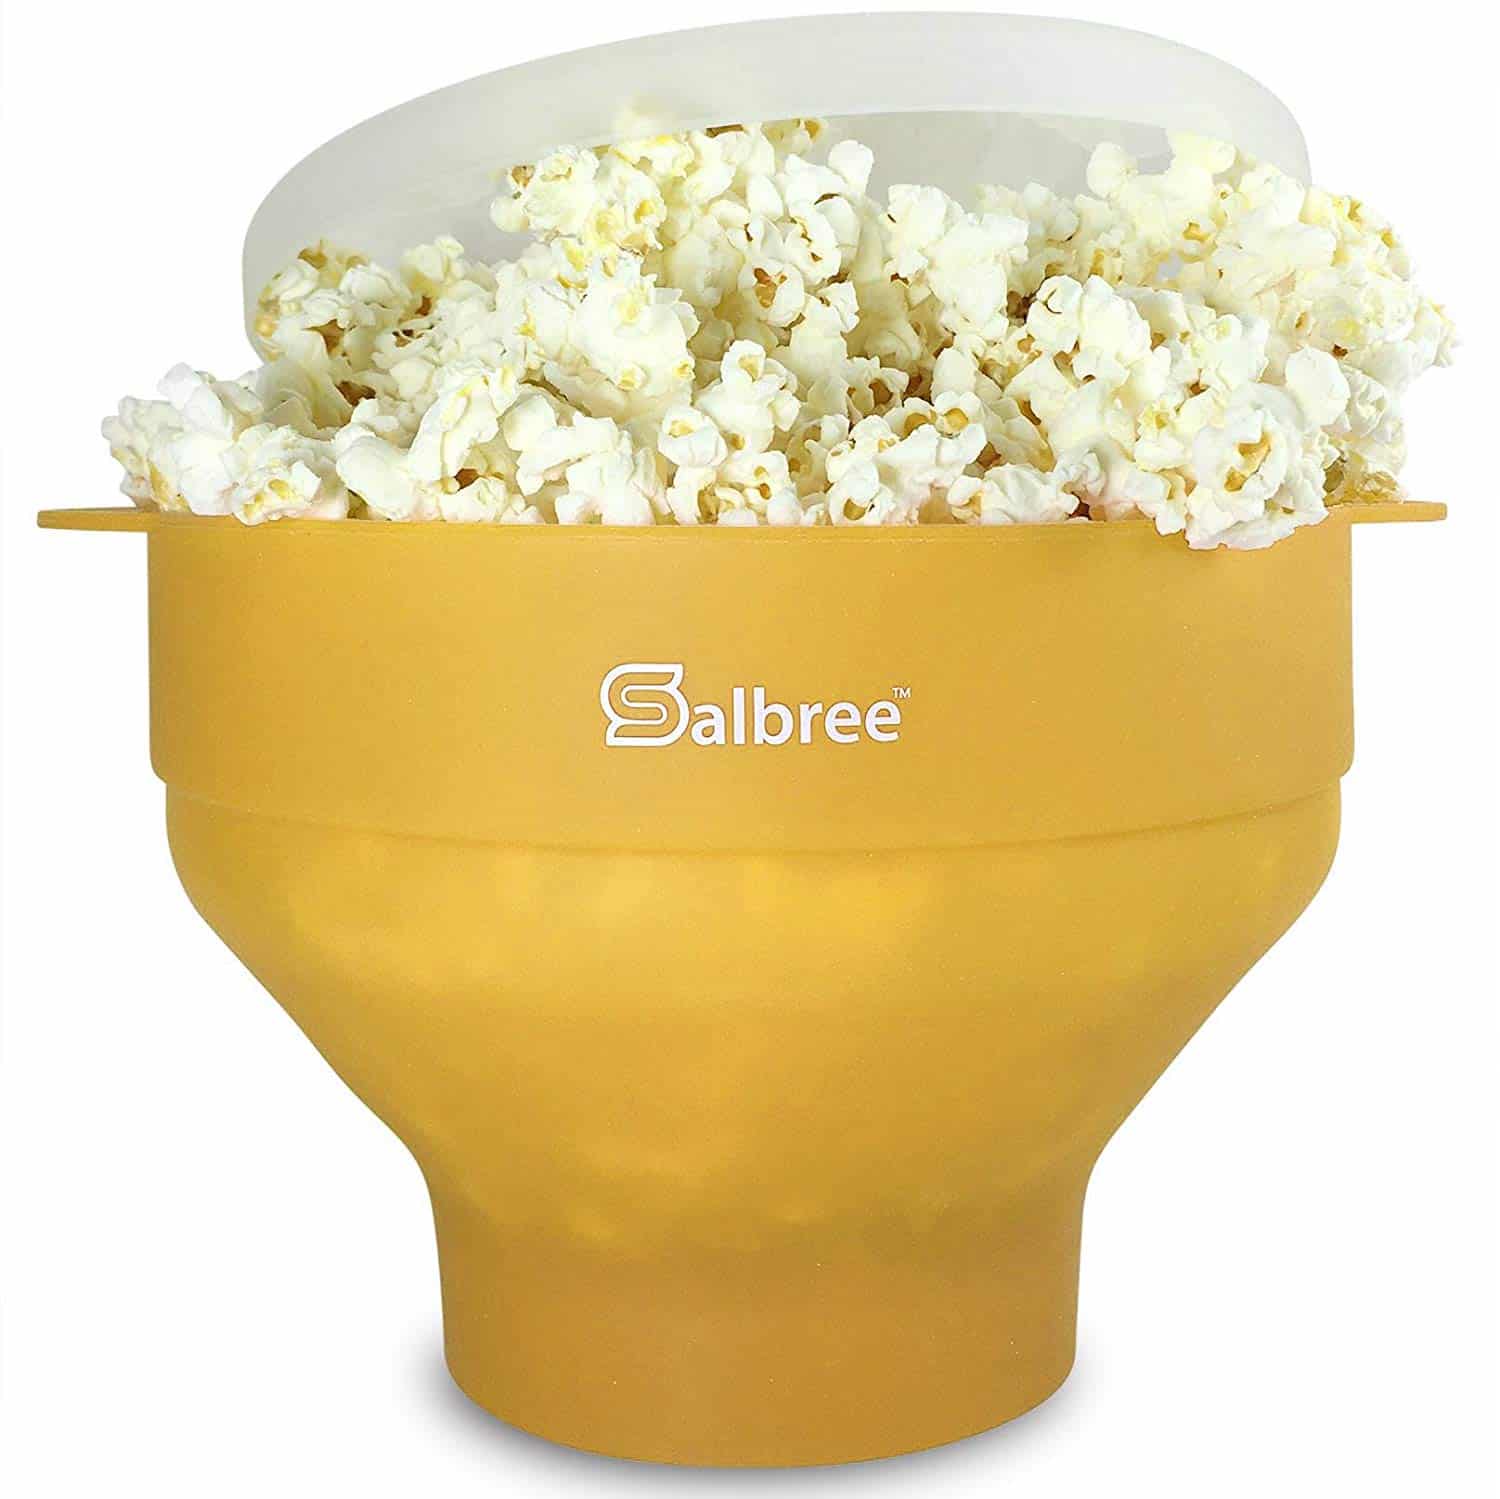 LIGHTNING DEAL ALERT! Silicone Microwave Popcorn Popper Collapsible Bowl BPA Free – 25% off!